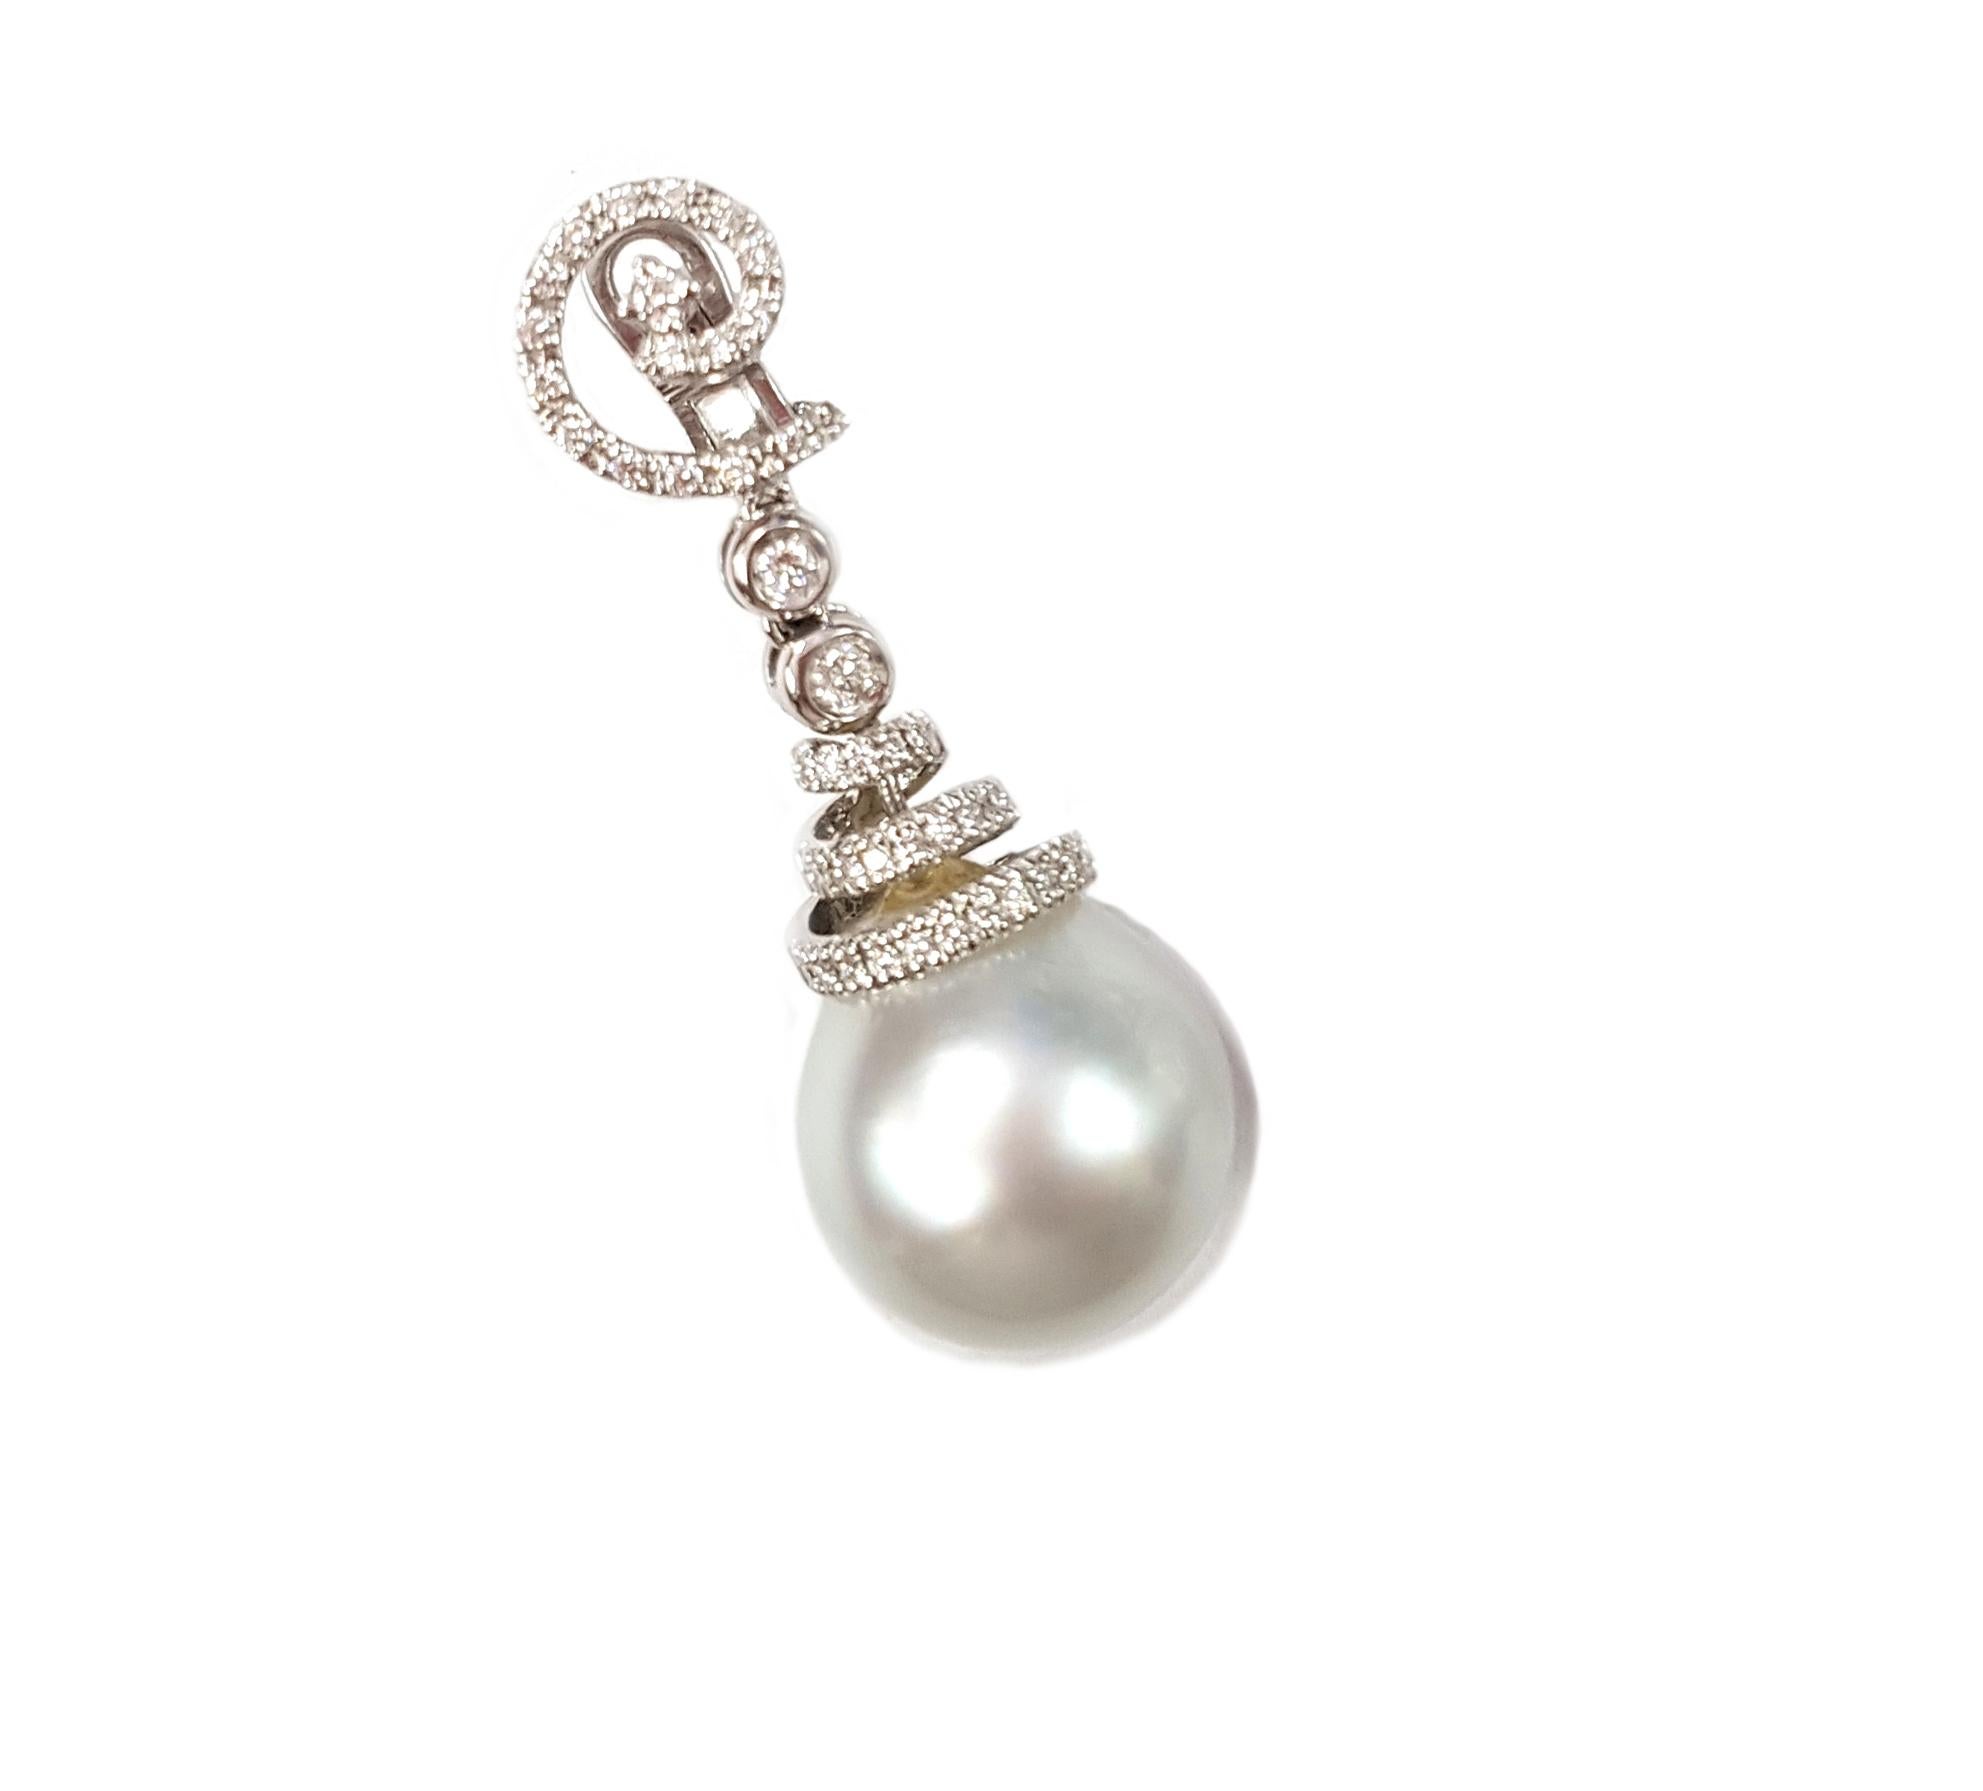 These gorgeous earrings feature a pair of natural large Australian pearls and a spiral design of 18-karat white gold set with white diamonds. Hand-made using traditional methods, this singular design has been designed and produced in Palermo, Sicily